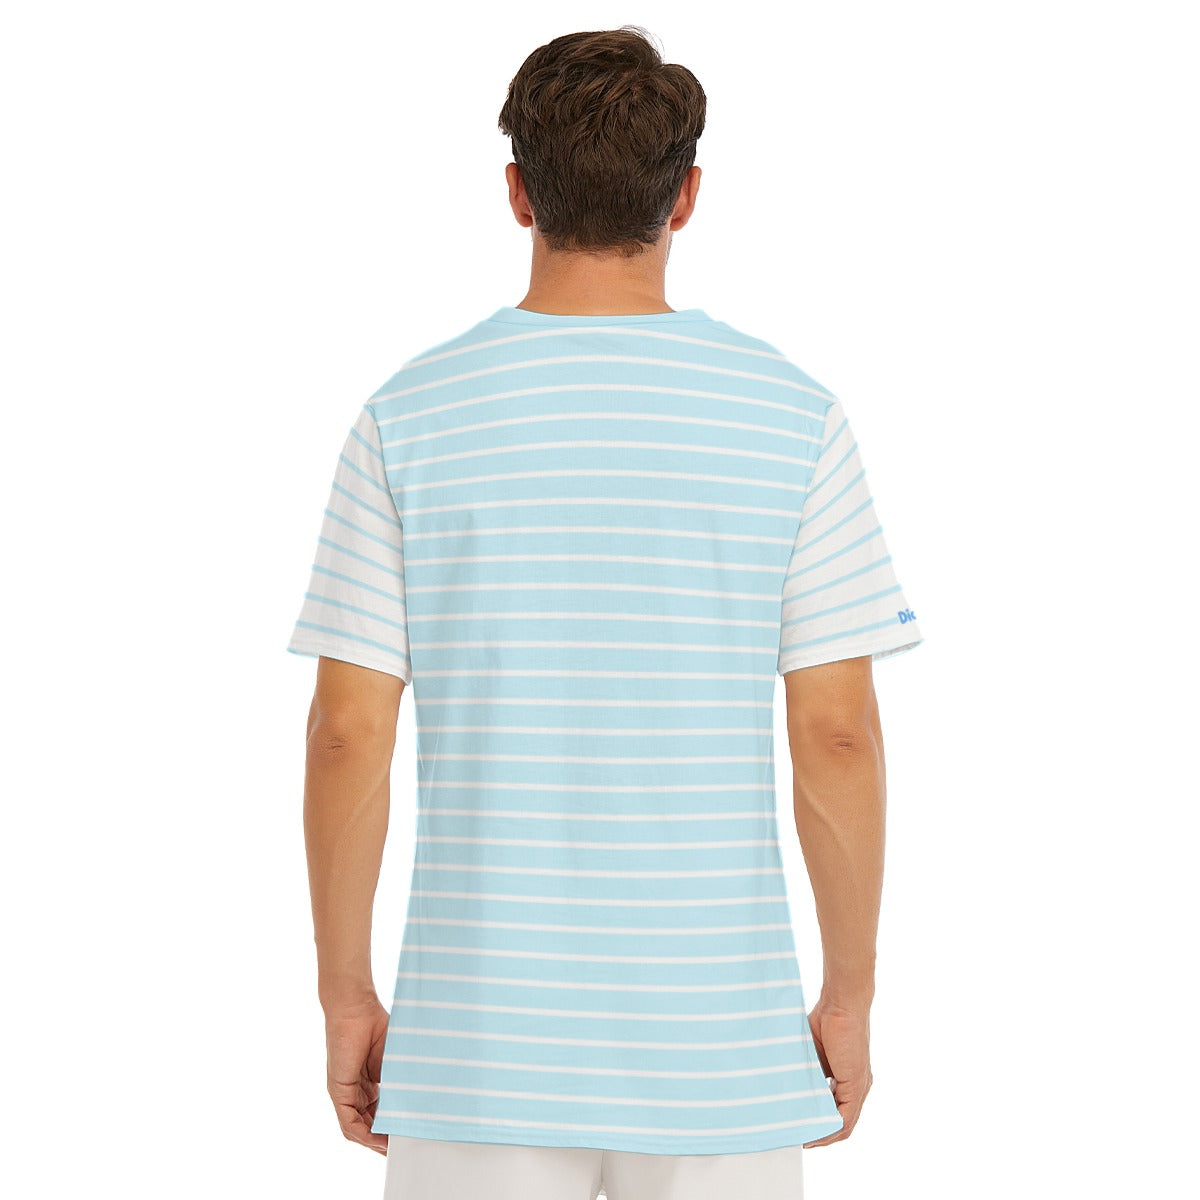 Adult Baby Play Shirt - Baby Blue